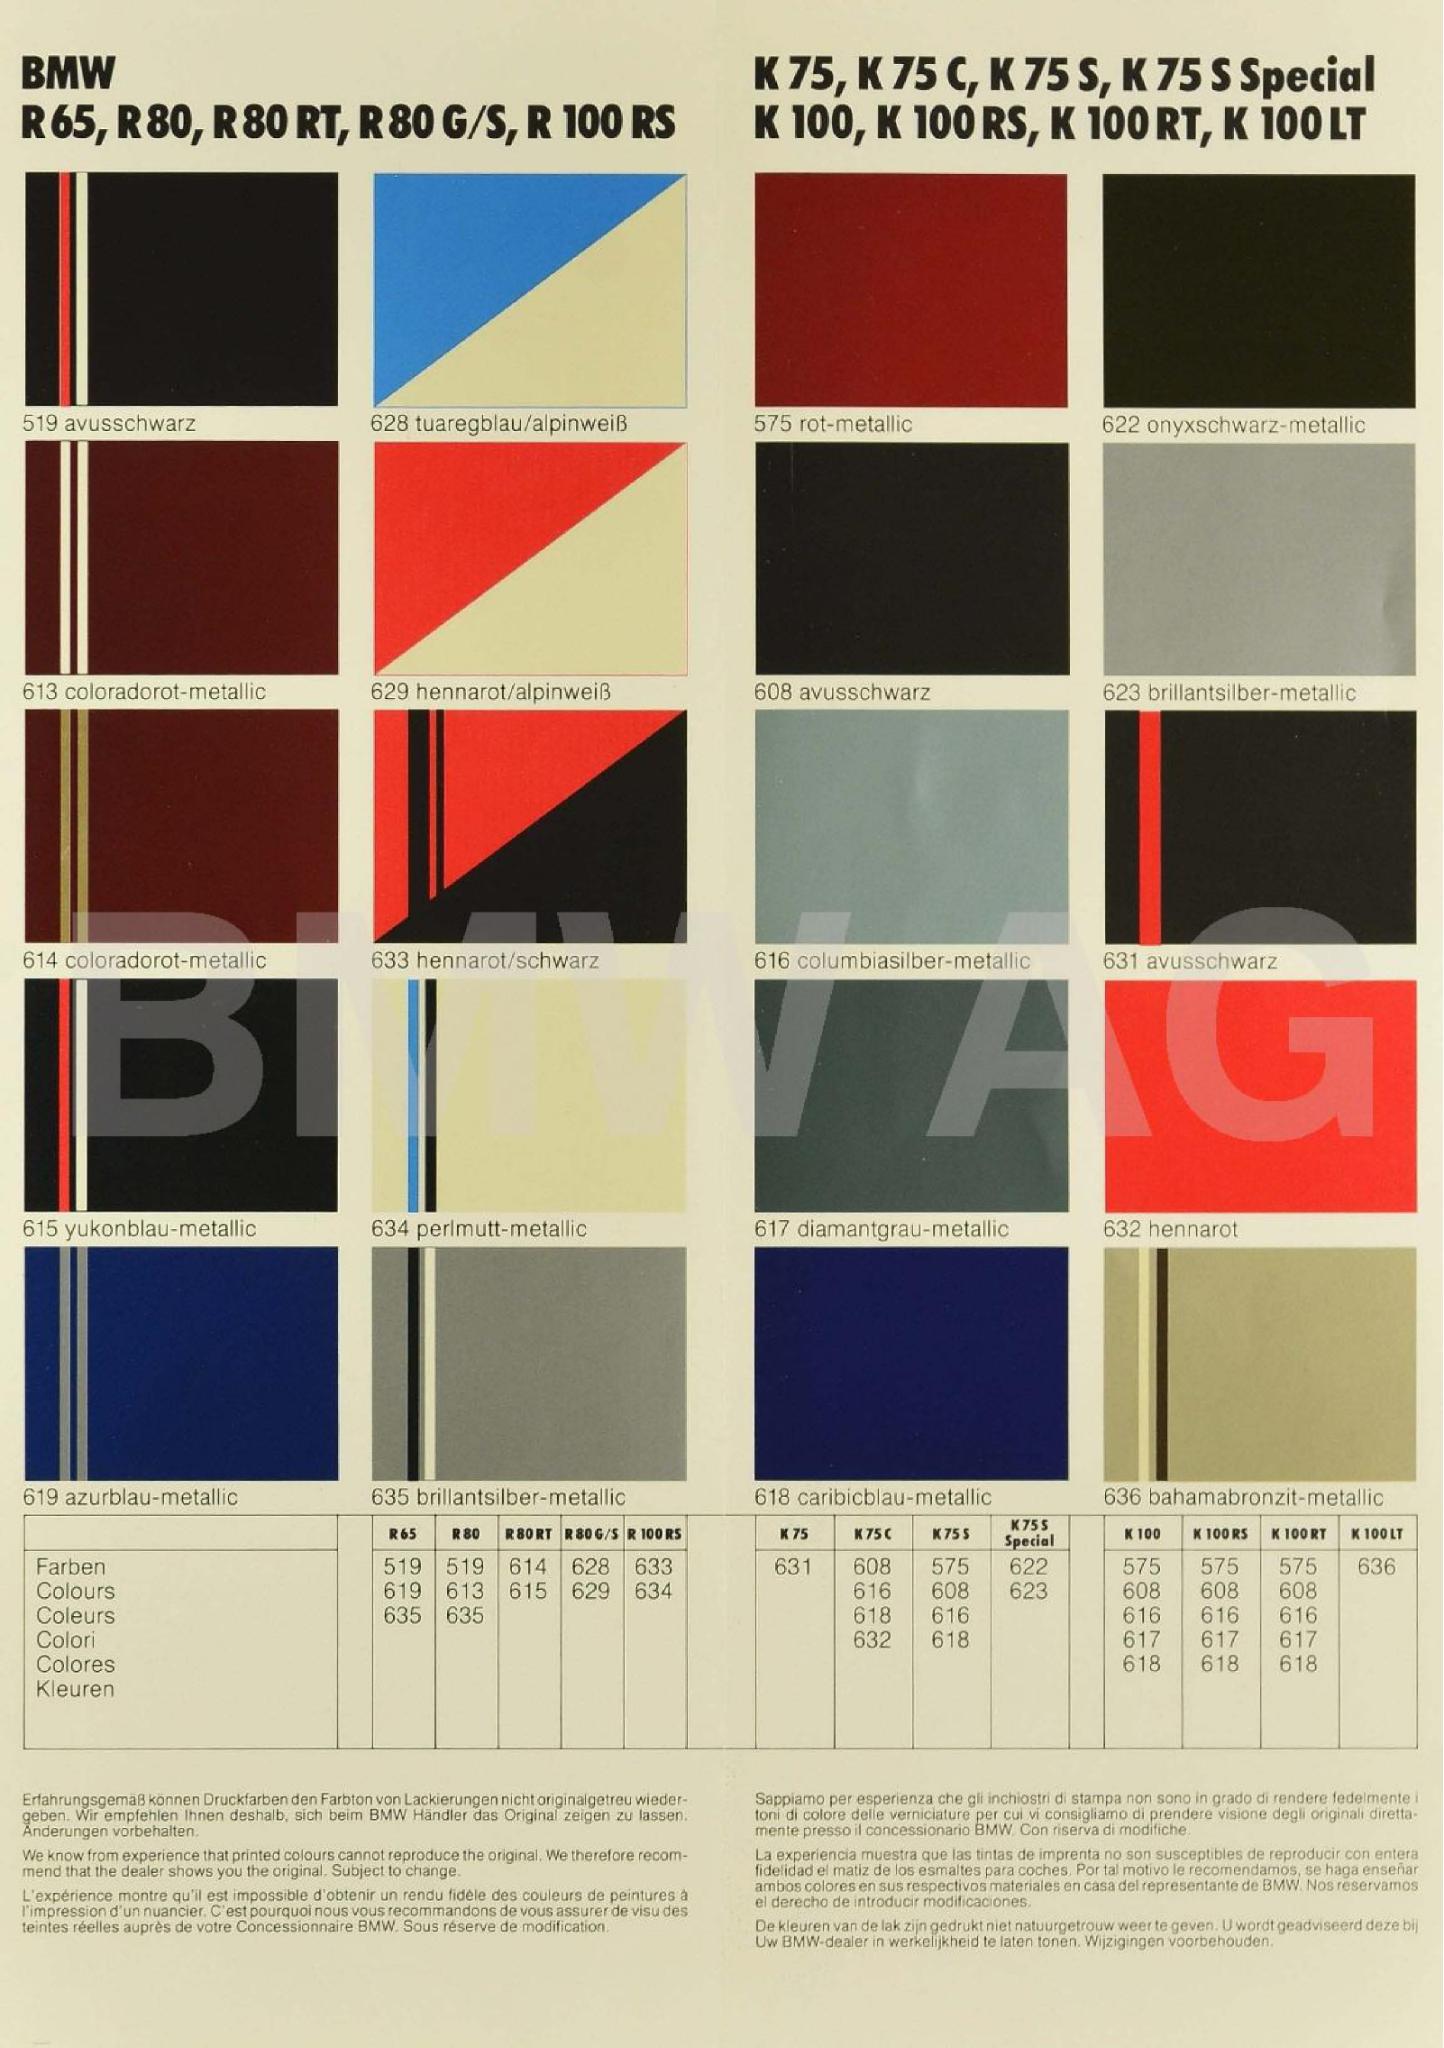 Colors used on BMW Motorcycles in 1986